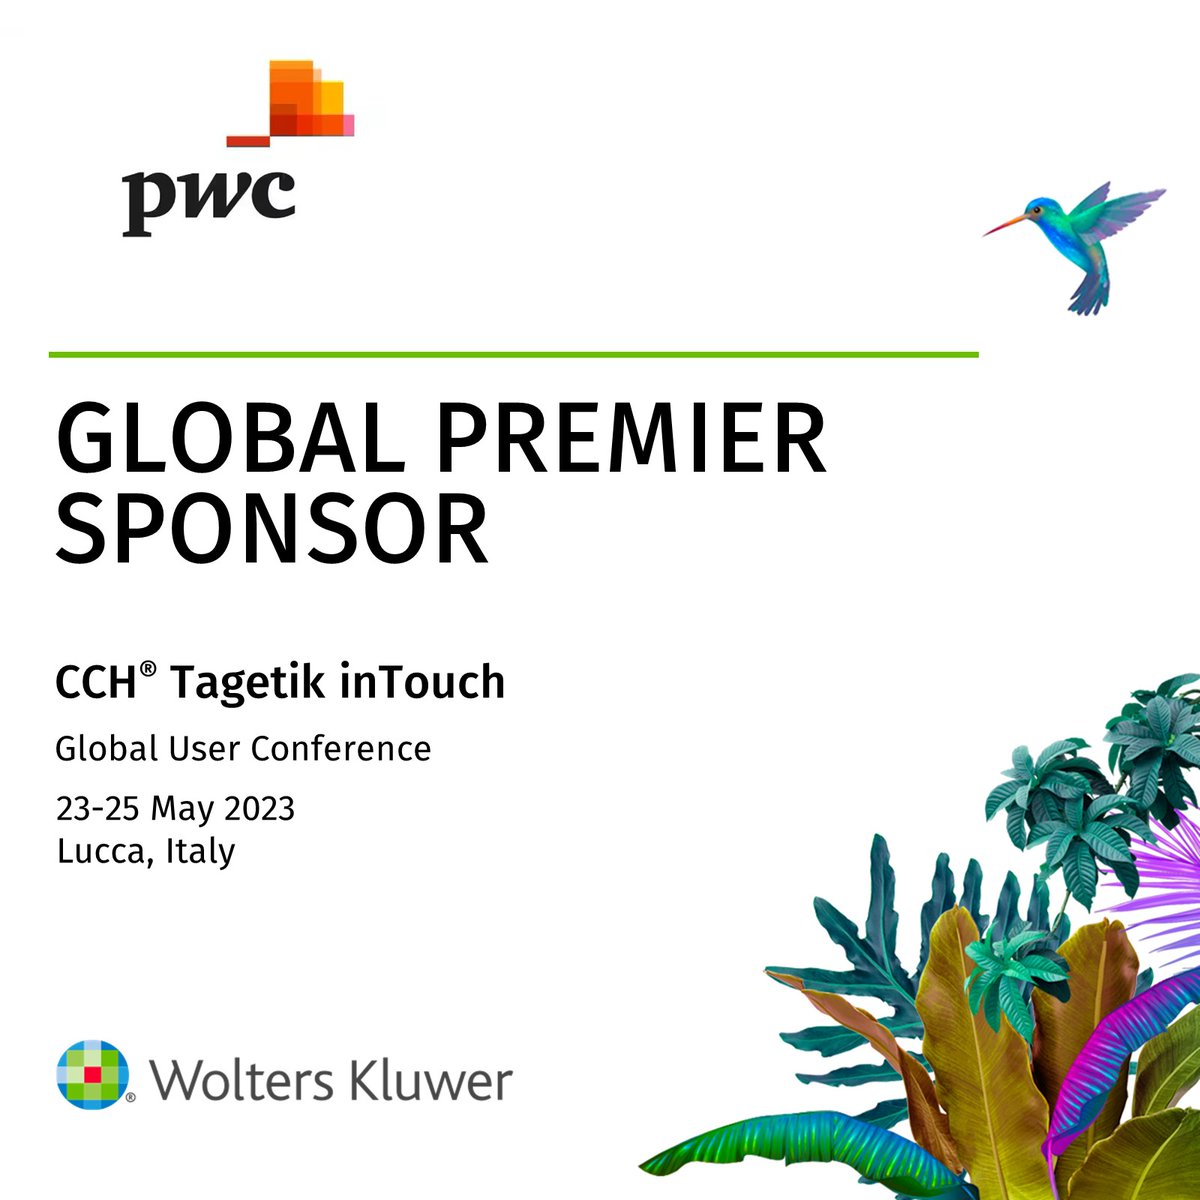 We are happy to announce that PwC will be one of the Global Premier Sponsors at the CCH Tagetik inTouch 2023. Come to visit their booth during the event! bit.ly/3mipk86

#CCHTagetik #inTouch2023 #LeadTheChange